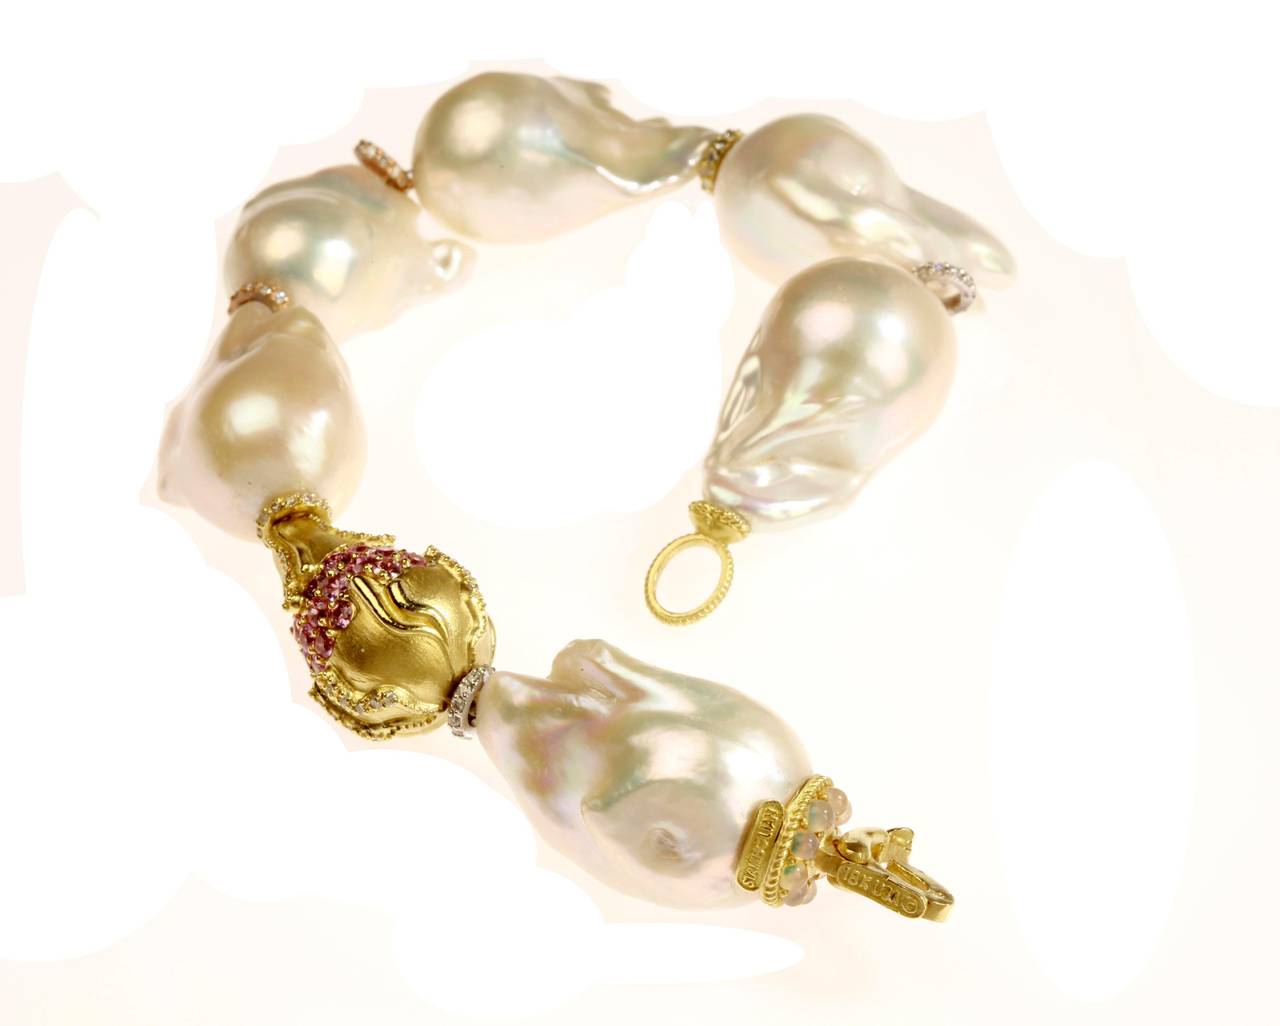 Baroque Pearl Bracelet with 18K Gold Rondel and Pink sapphires & Diamonds

0.92 ct.'s of G Color, VS Quality White Diamonds

1.44 ct.'s of Pink sapphires

In between each pearl is a diamond loop showing the separation between each pearl